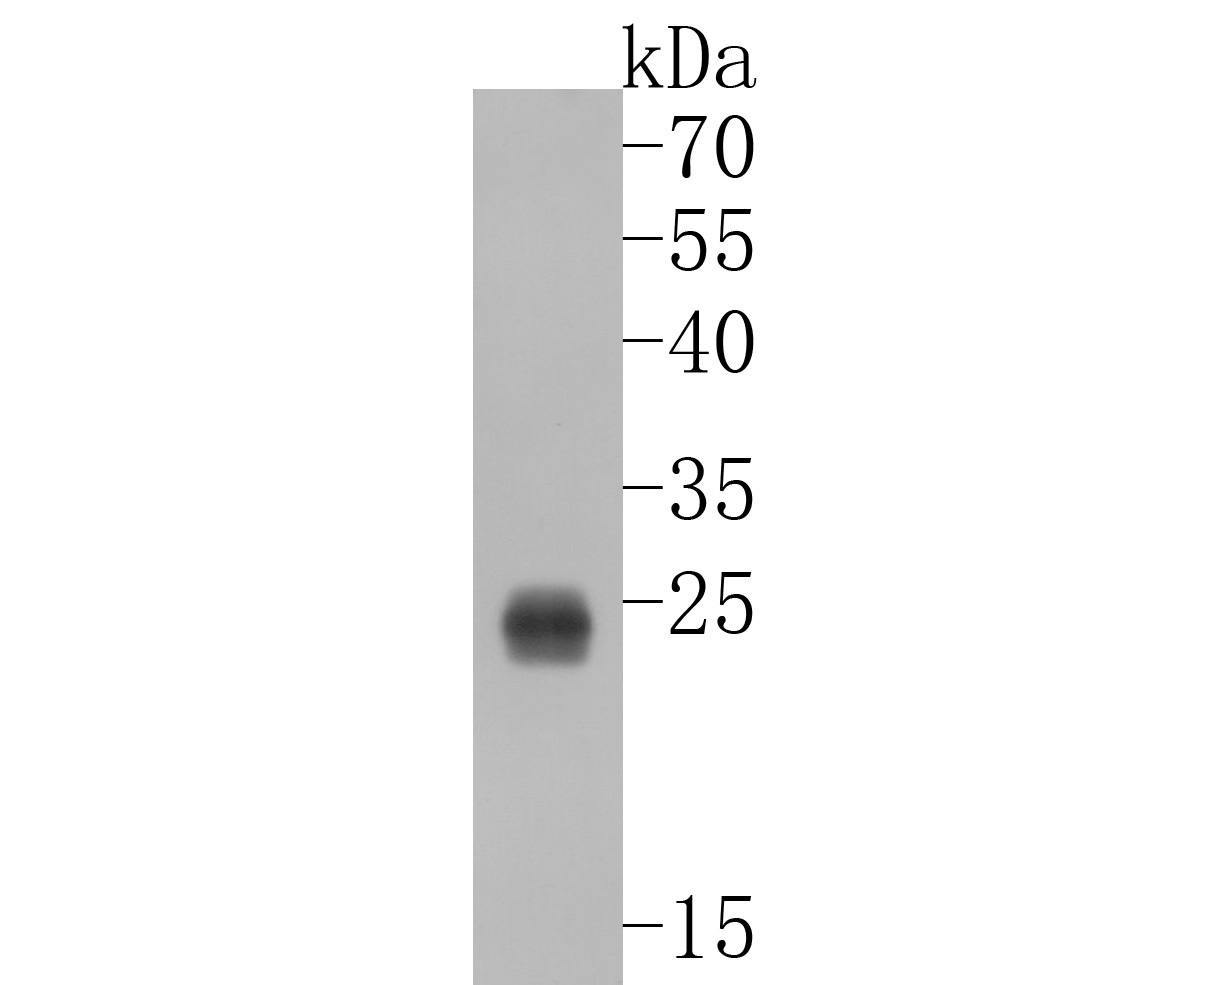 Western blot analysis of Ndufs4 on zebrafish tissue lysates. Proteins were transferred to a PVDF membrane and blocked with 5% BSA in PBS for 1 hour at room temperature. The primary antibody (ET7109-37, 1/500) was used in 5% BSA at room temperature for 2 hours. Goat Anti-Rabbit IgG - HRP Secondary Antibody (HA1001) at 1:5,000 dilution was used for 1 hour at room temperature.